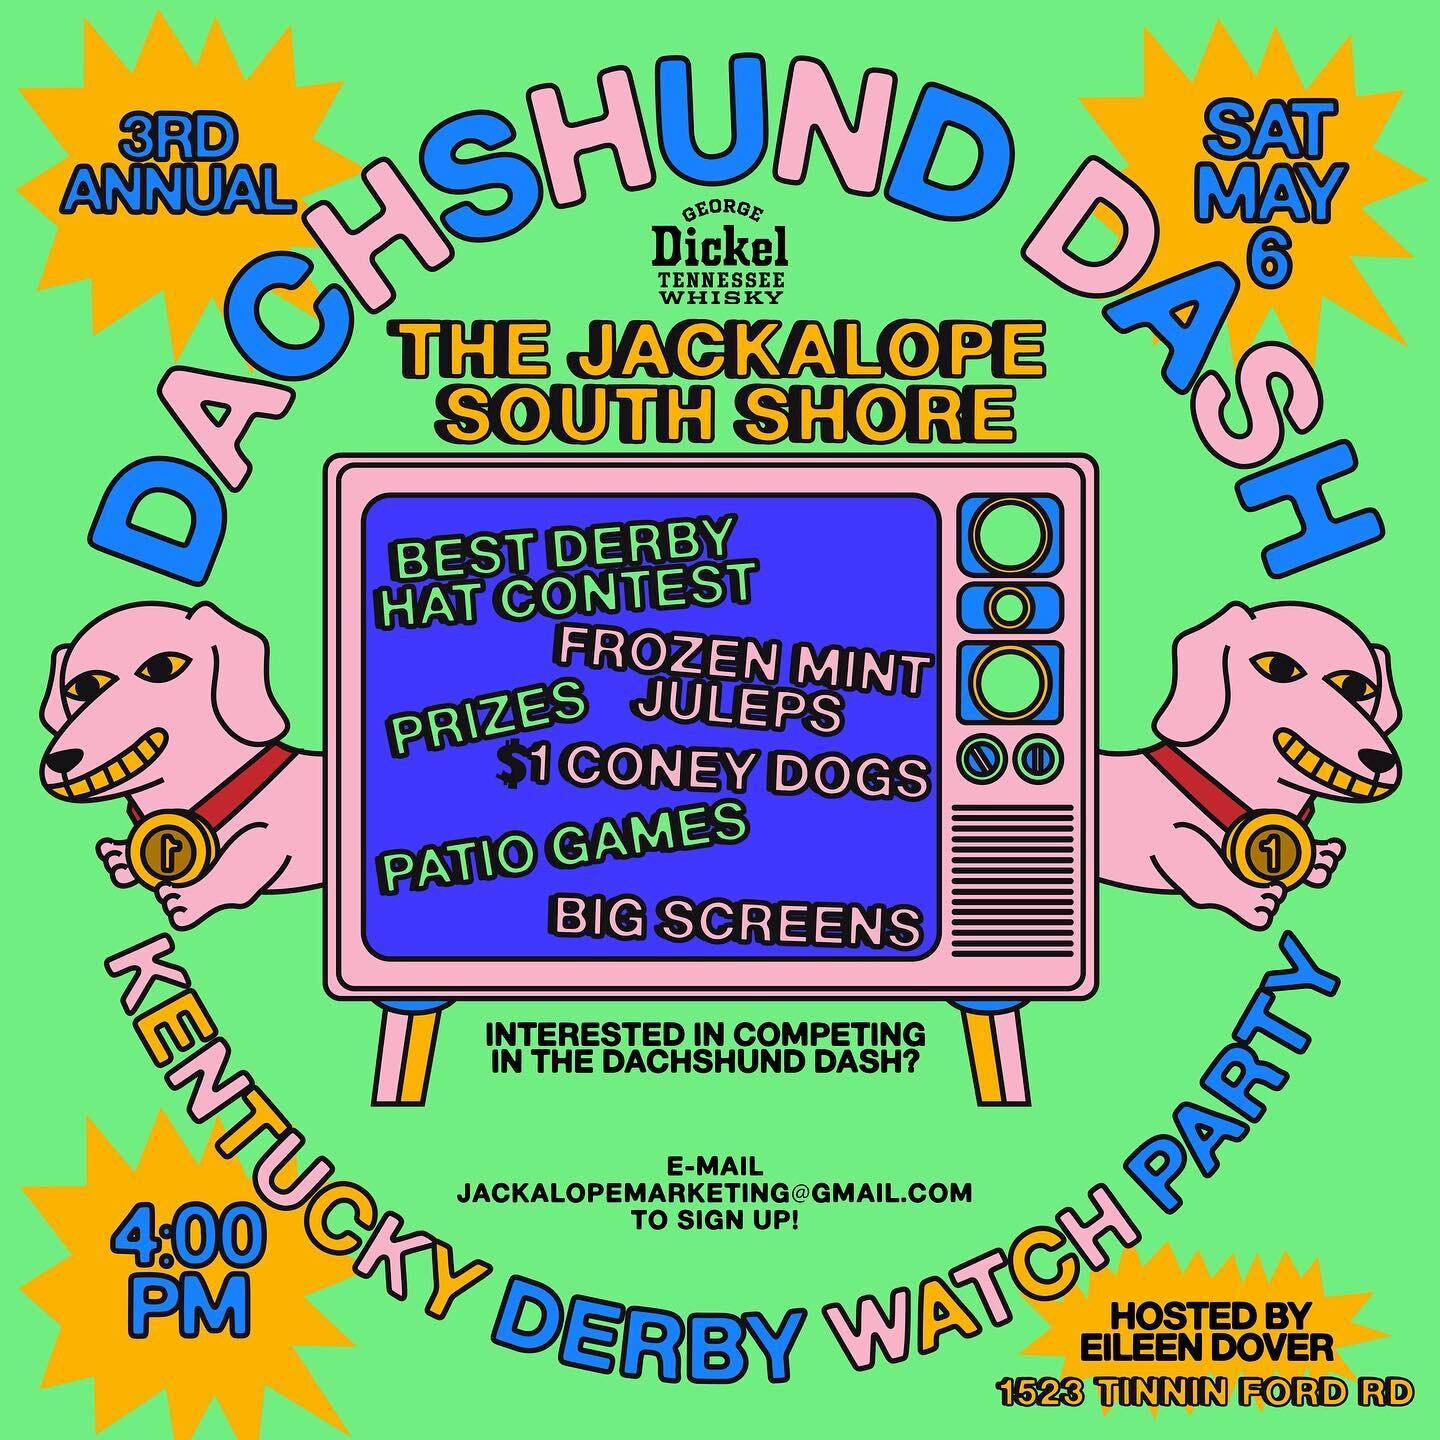 Dachshund Dash happening in our backyard this weekend y&rsquo;all! We&rsquo;ll be serving up frozen Mint Juleps and showing the greatest two minutes in sports!